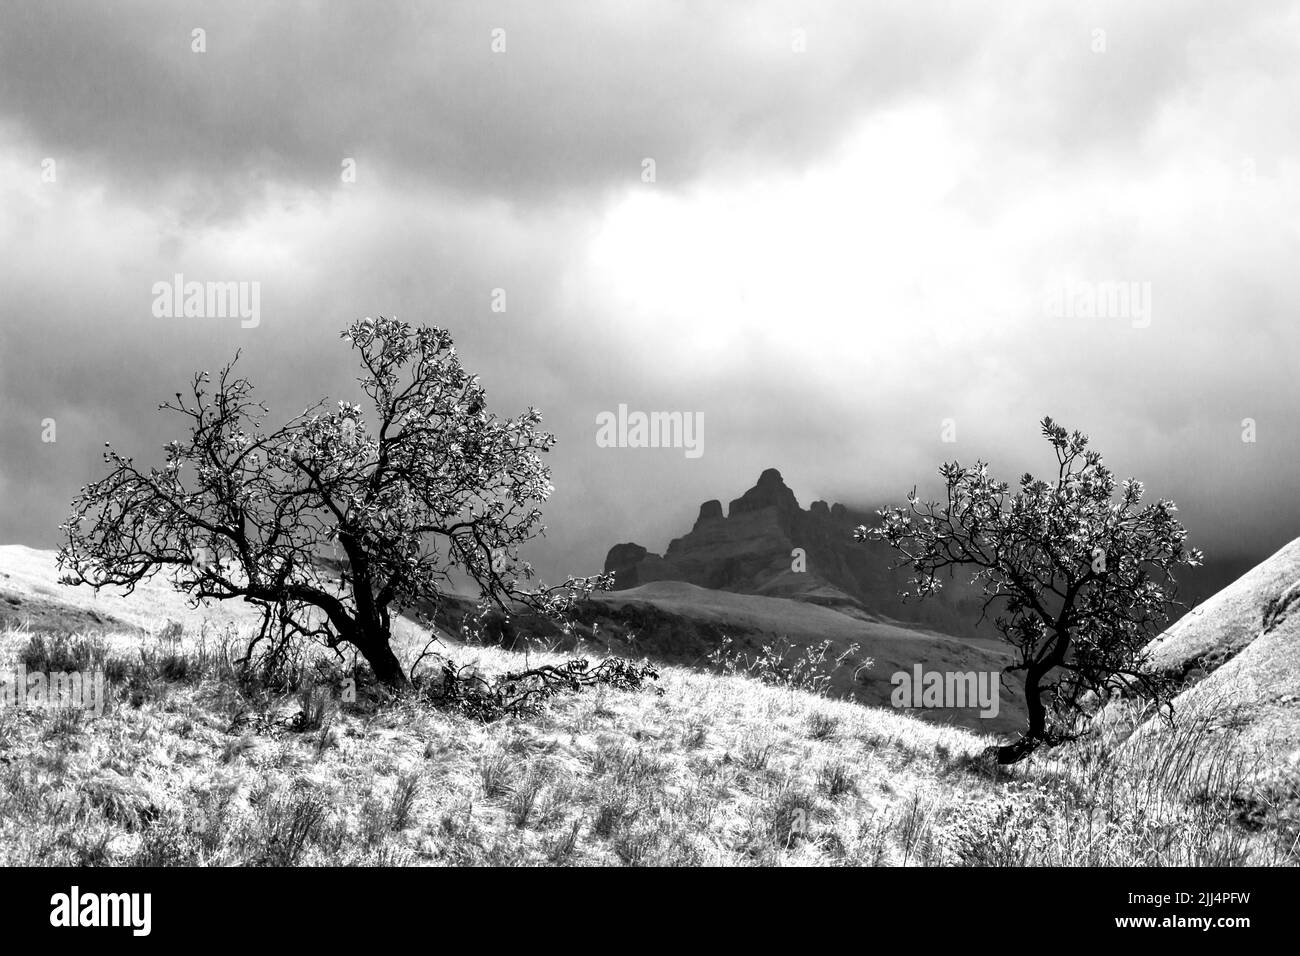 Ominous view in black and white of a storm gathering around the high peaks of the Drakensberg mountains of South Africa Stock Photo